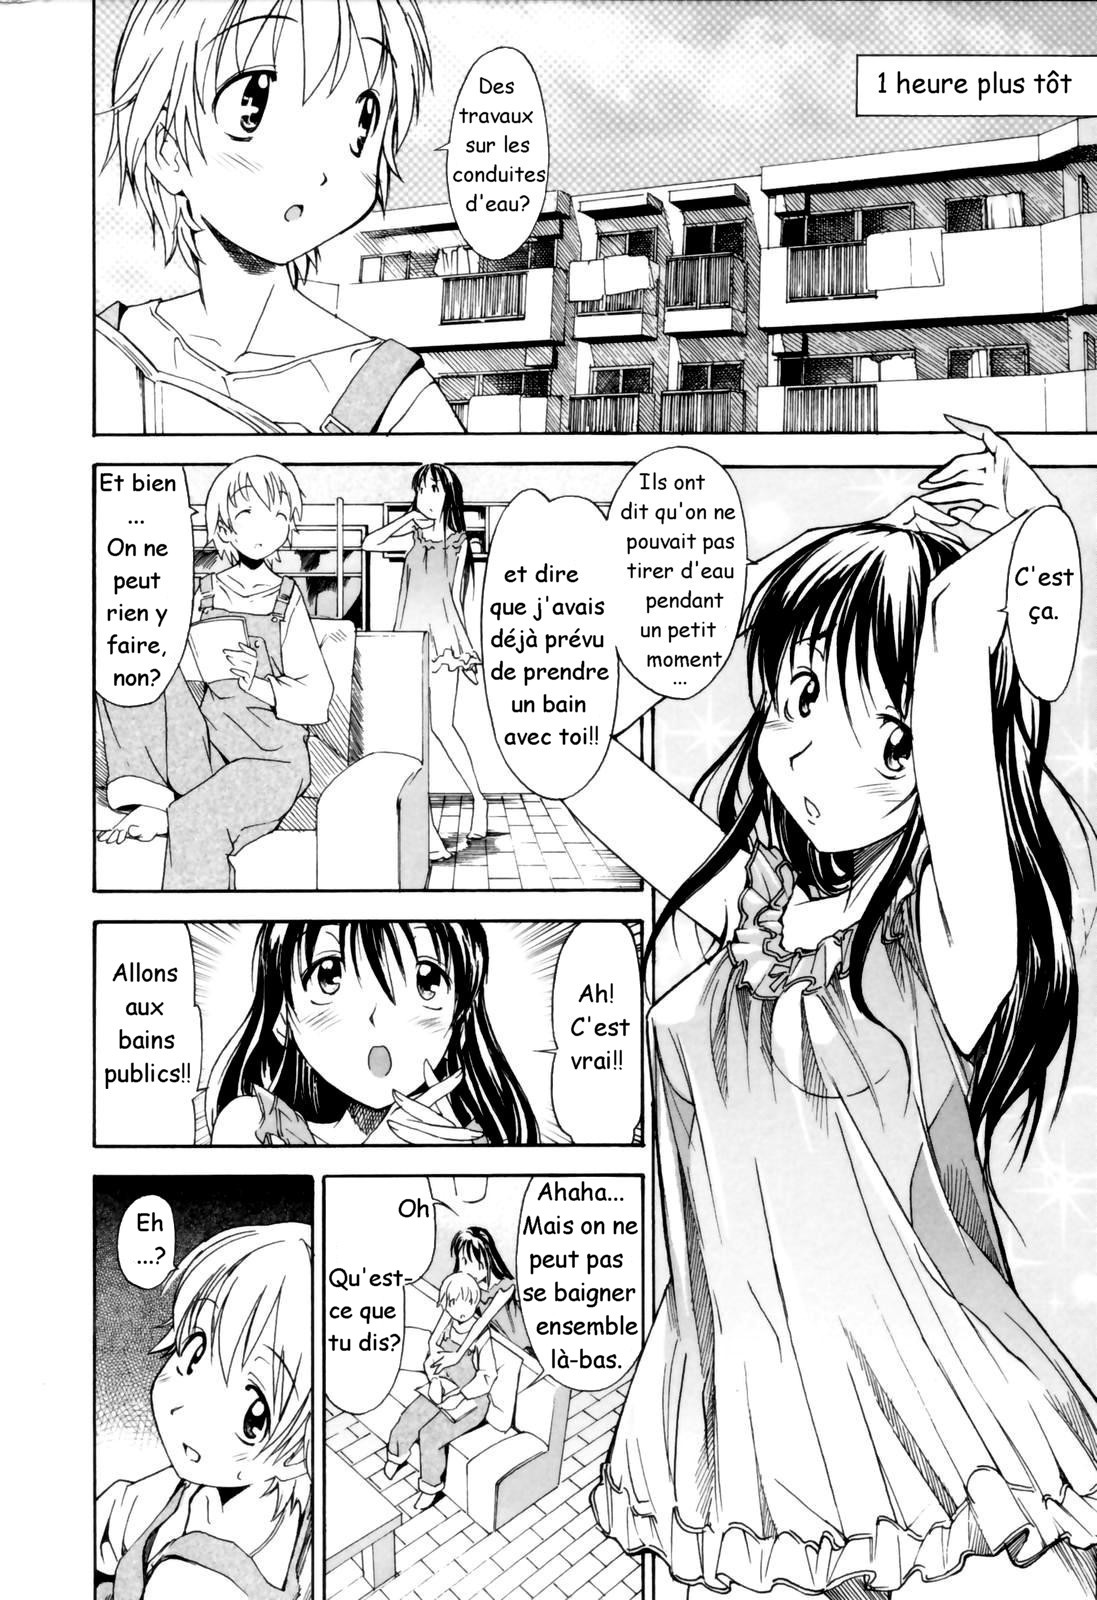 Oneechan no Onegai - A Wish of my Sister Ch. 1-4, 7-8 numero d'image 38